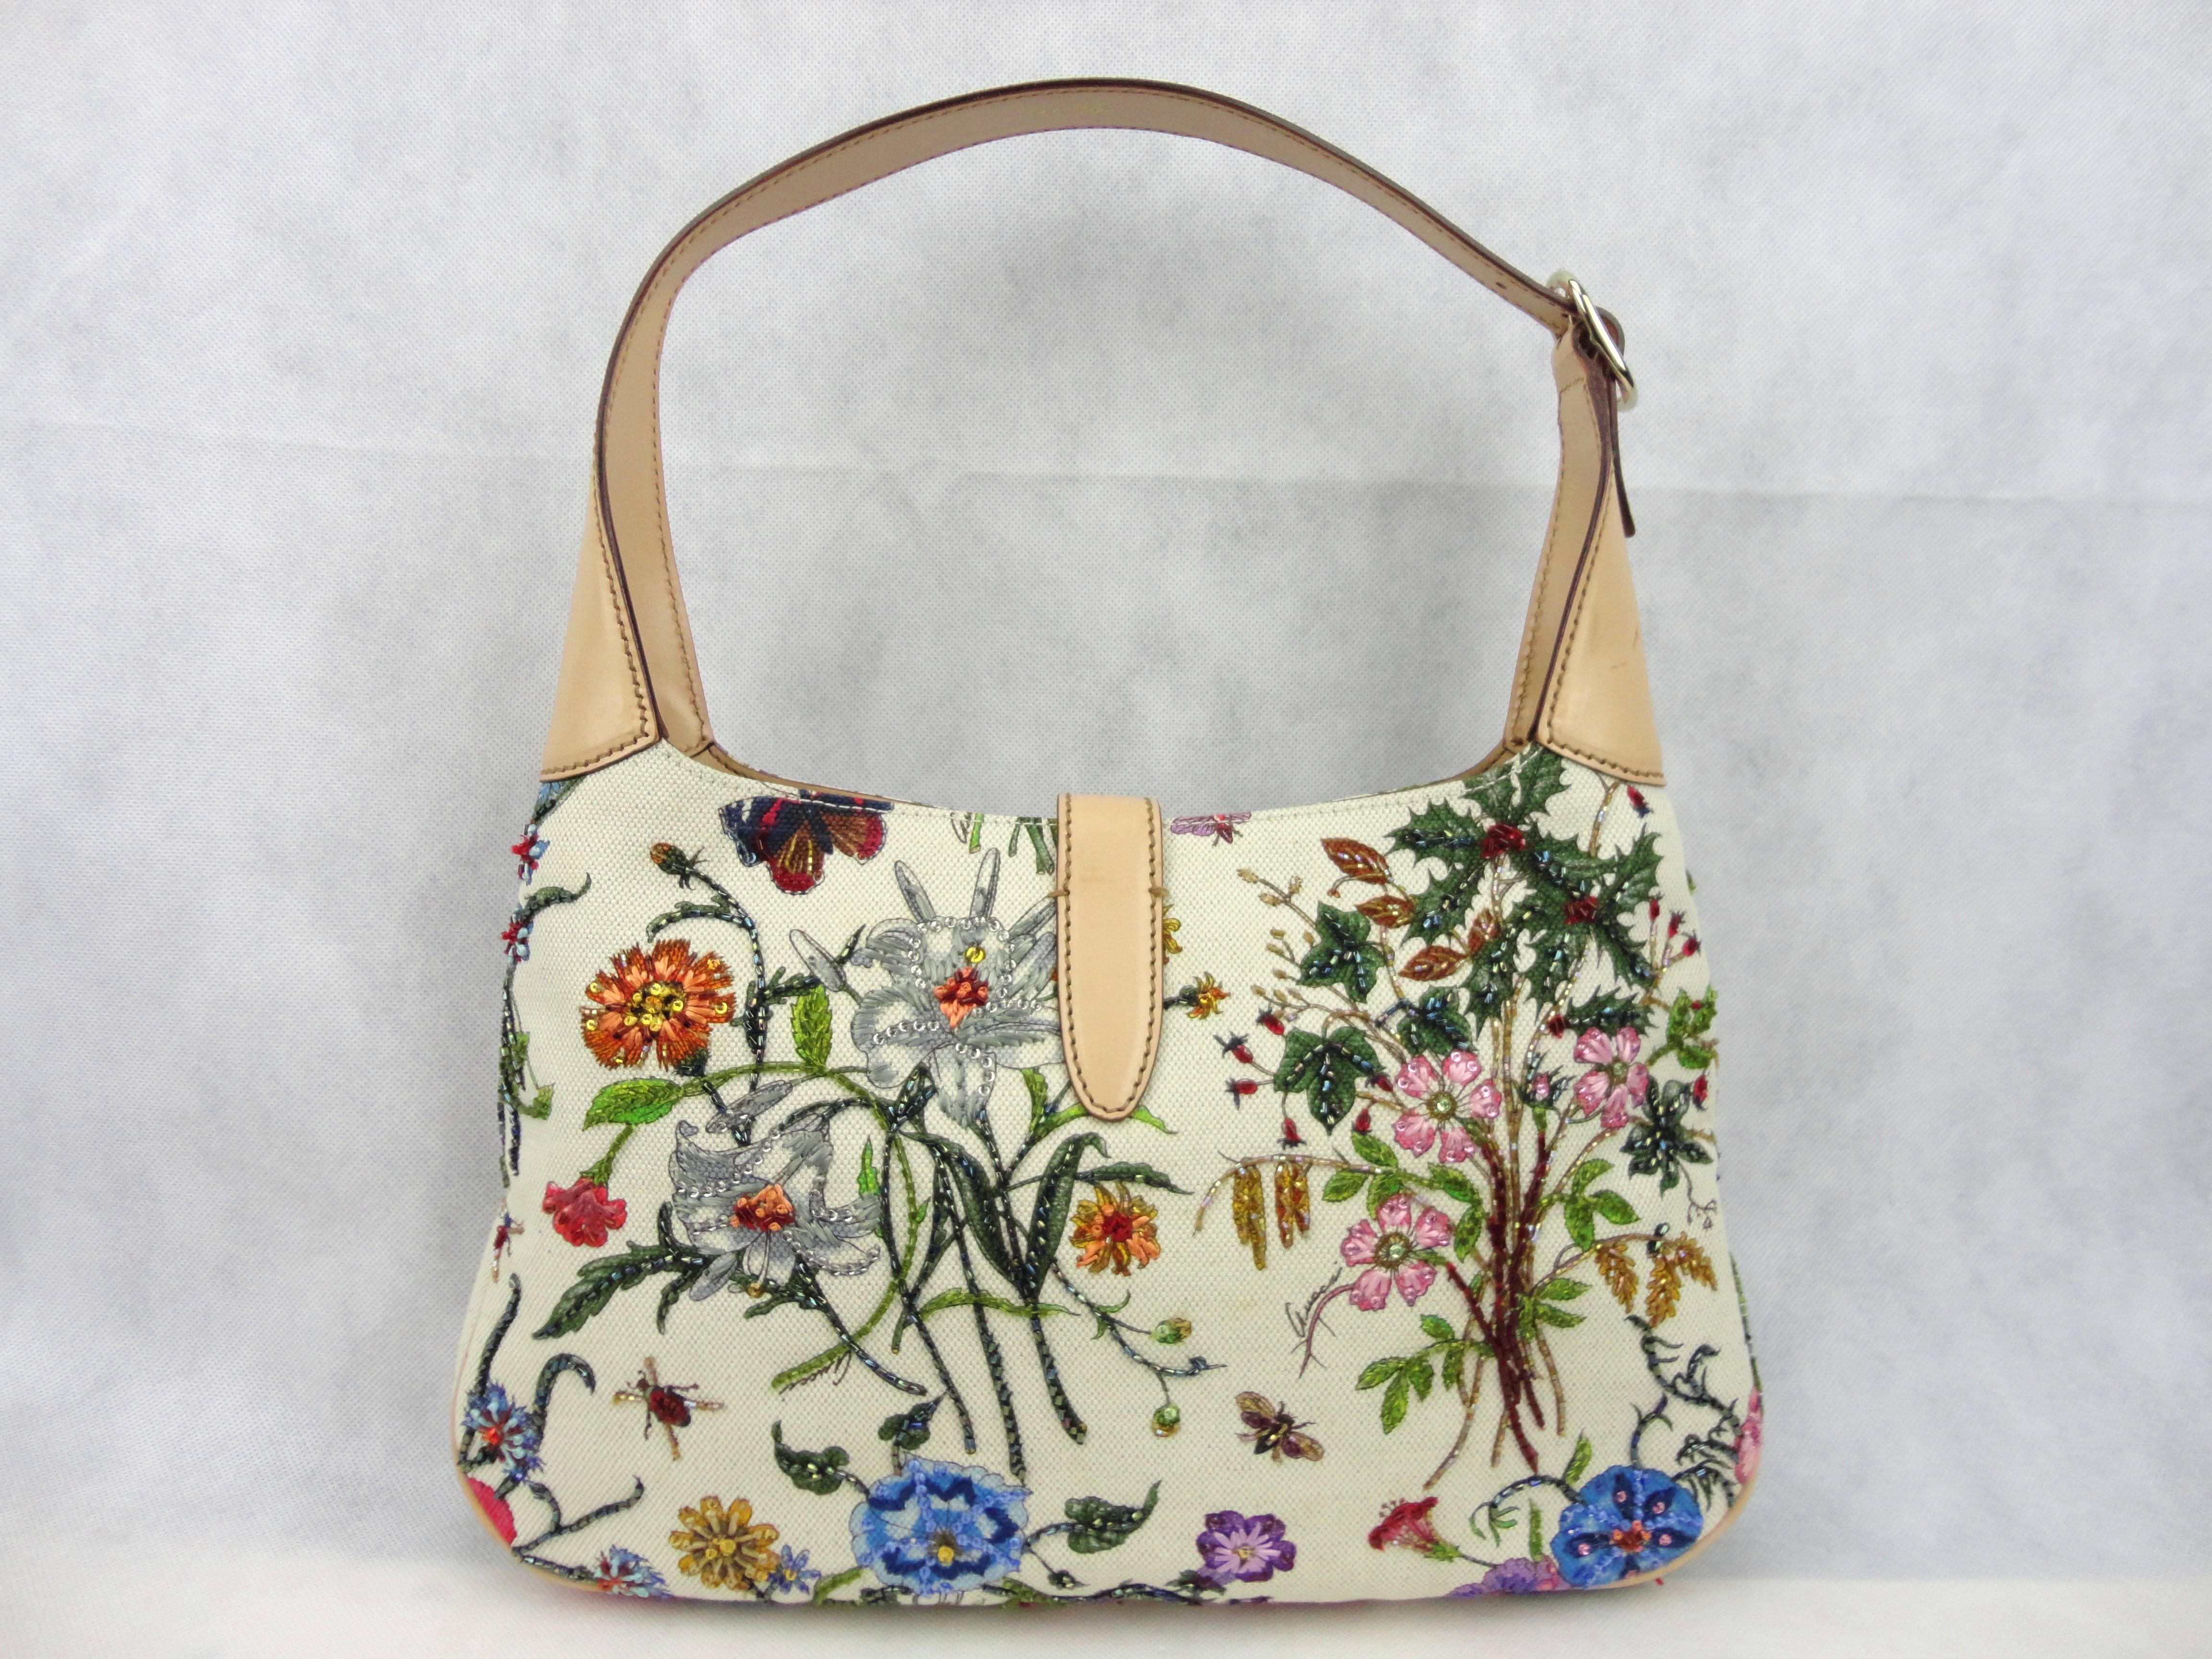 Gucci canvas floral Flora Jackie O hobo bag from Gucci 2005 cruise collection. Extremely hard to find, this hand embroidered limited edition bag is one of Gucci´s icons. This bag is beautiful crafted of brightly colored floral canvas with beads all